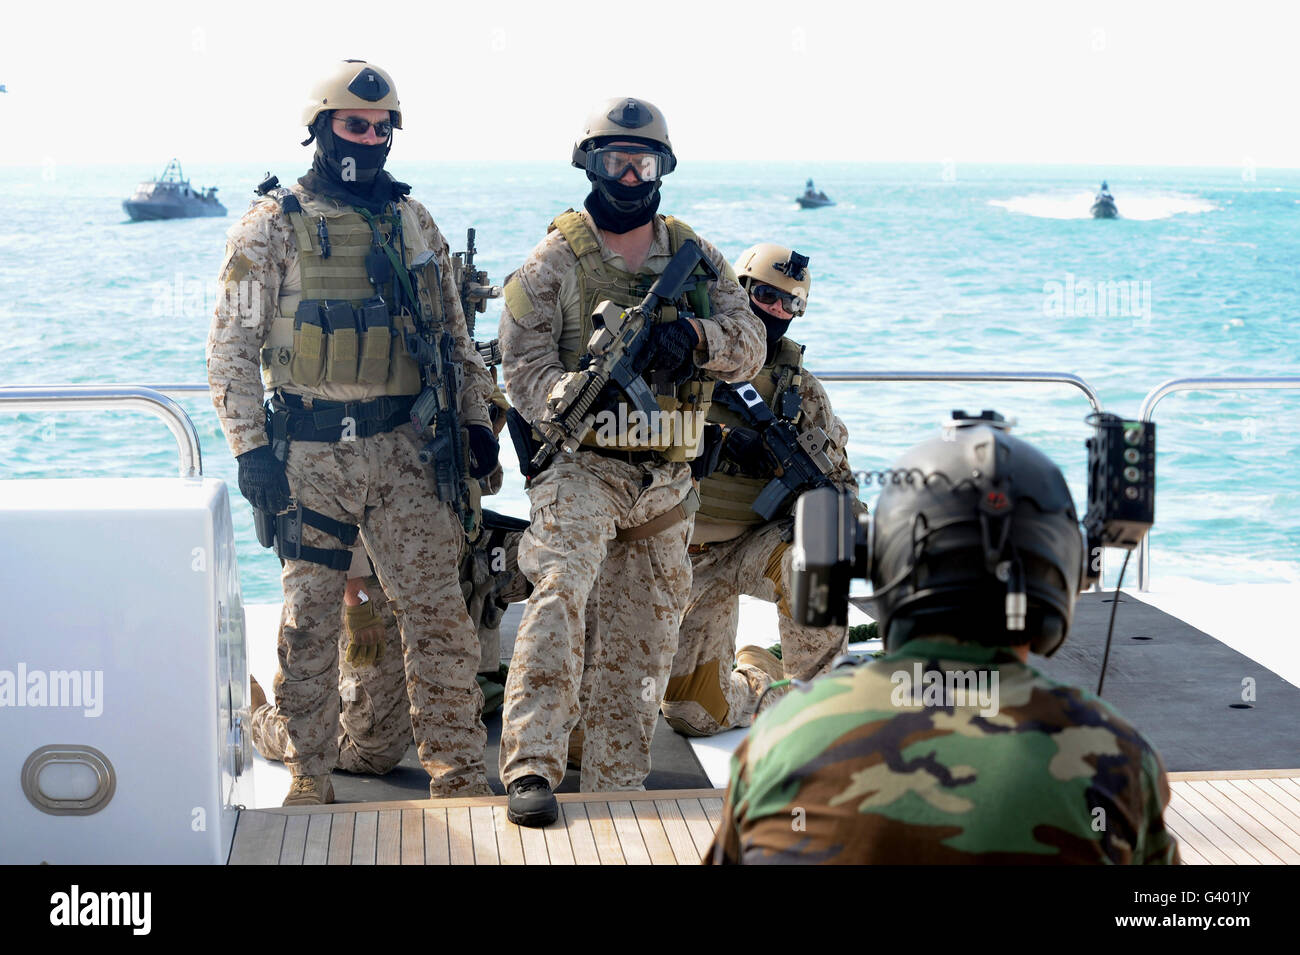 U.S. Navy SEALs prepare to take down a yacht in the Gulf of Mexico off of Key West, Florida. Stock Photo